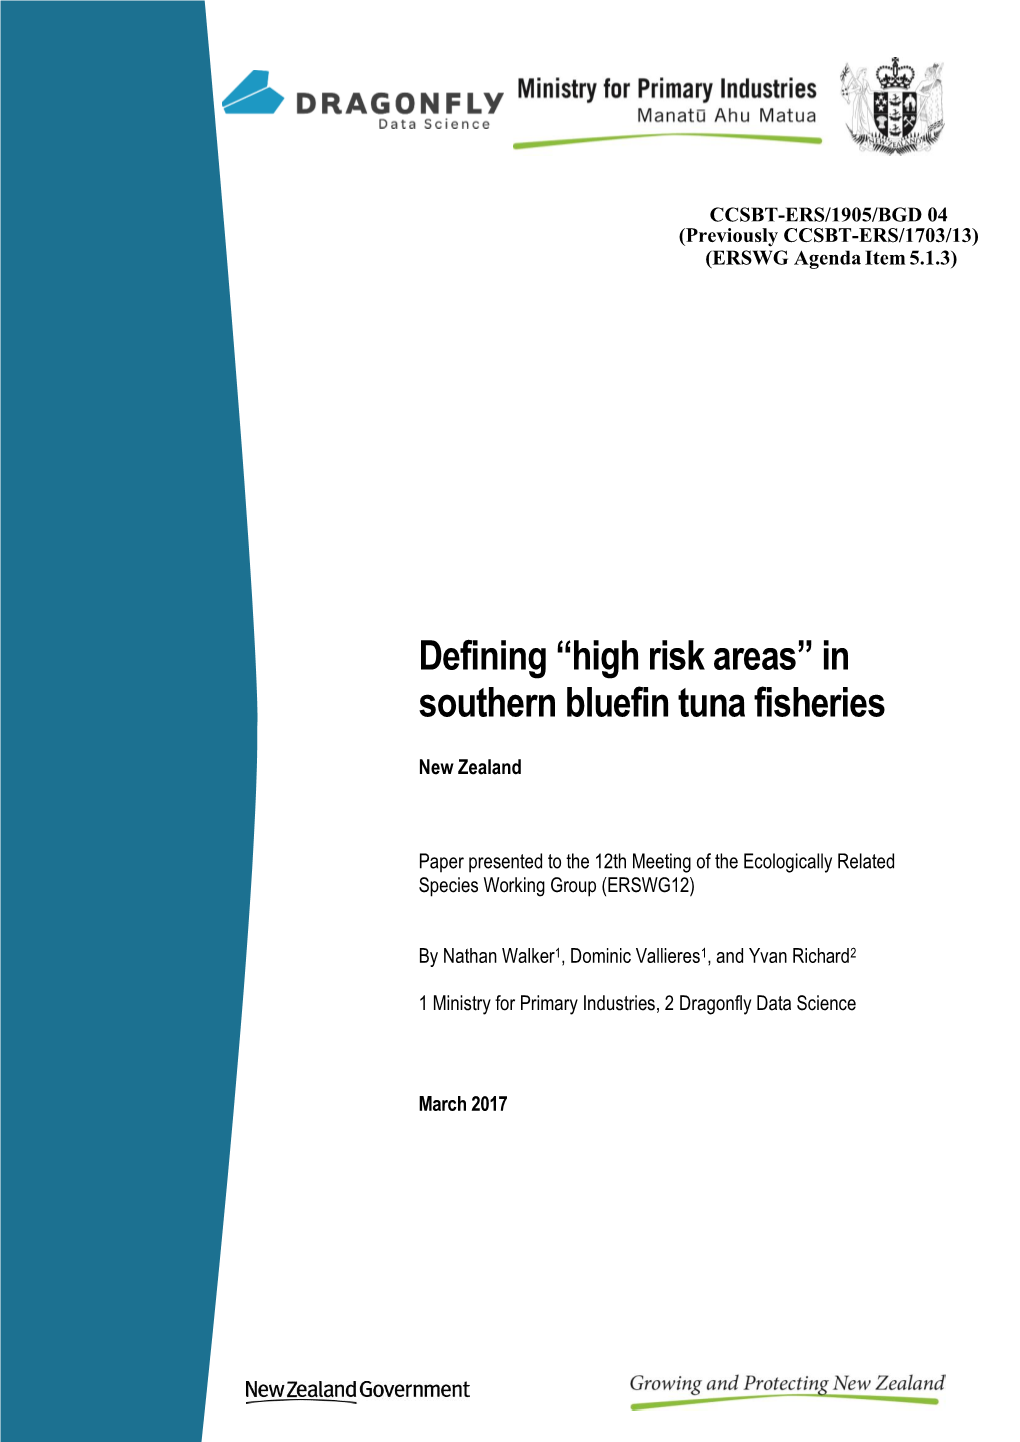 High Risk Areas” in Southern Bluefin Tuna Fisheries